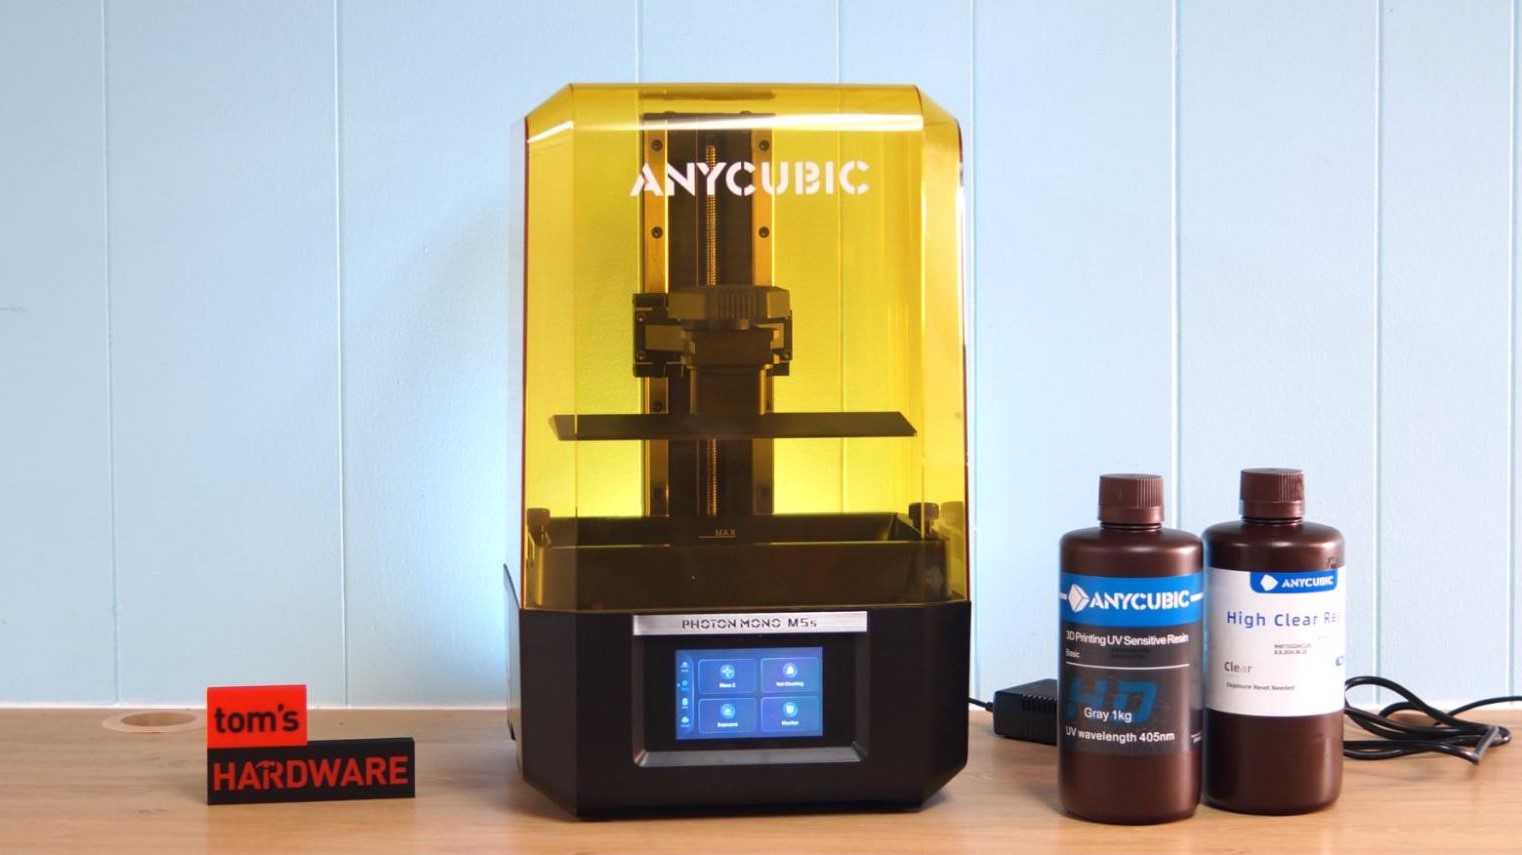 Anycubic Photon Mono M5s compatible 12K resin & parameters